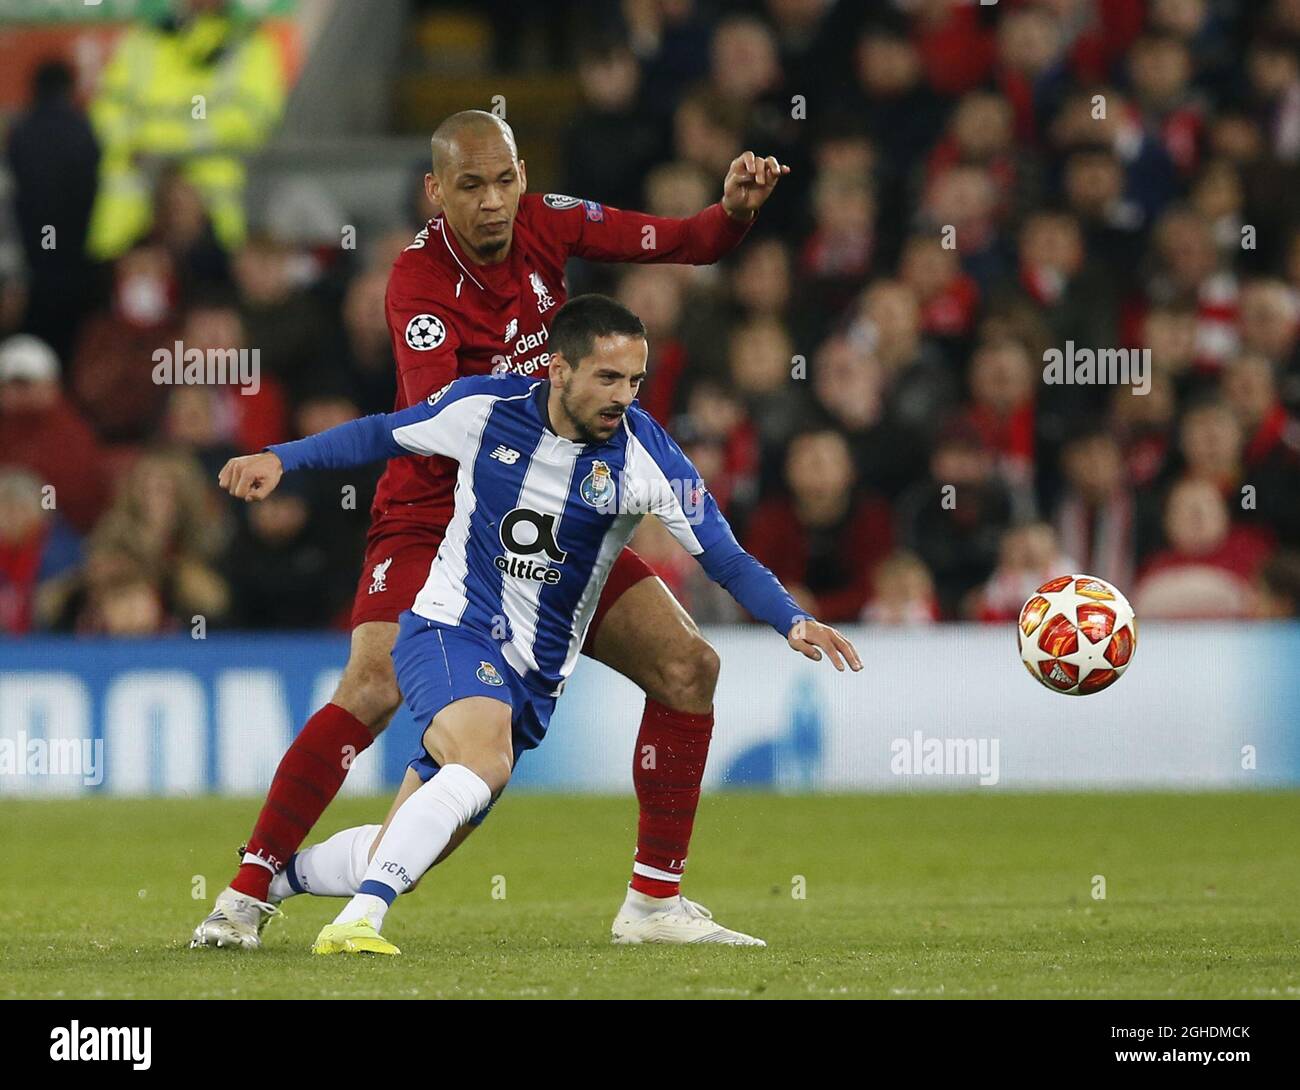 Fabinho of Liverpool tackles Bruno Costa of FC Porto during the UEFA Champions League match at Anfield, Liverpool. Picture date: 9th April 2019. Picture credit should read: Andrew Yates/Sportimage via PA Images Stock Photo